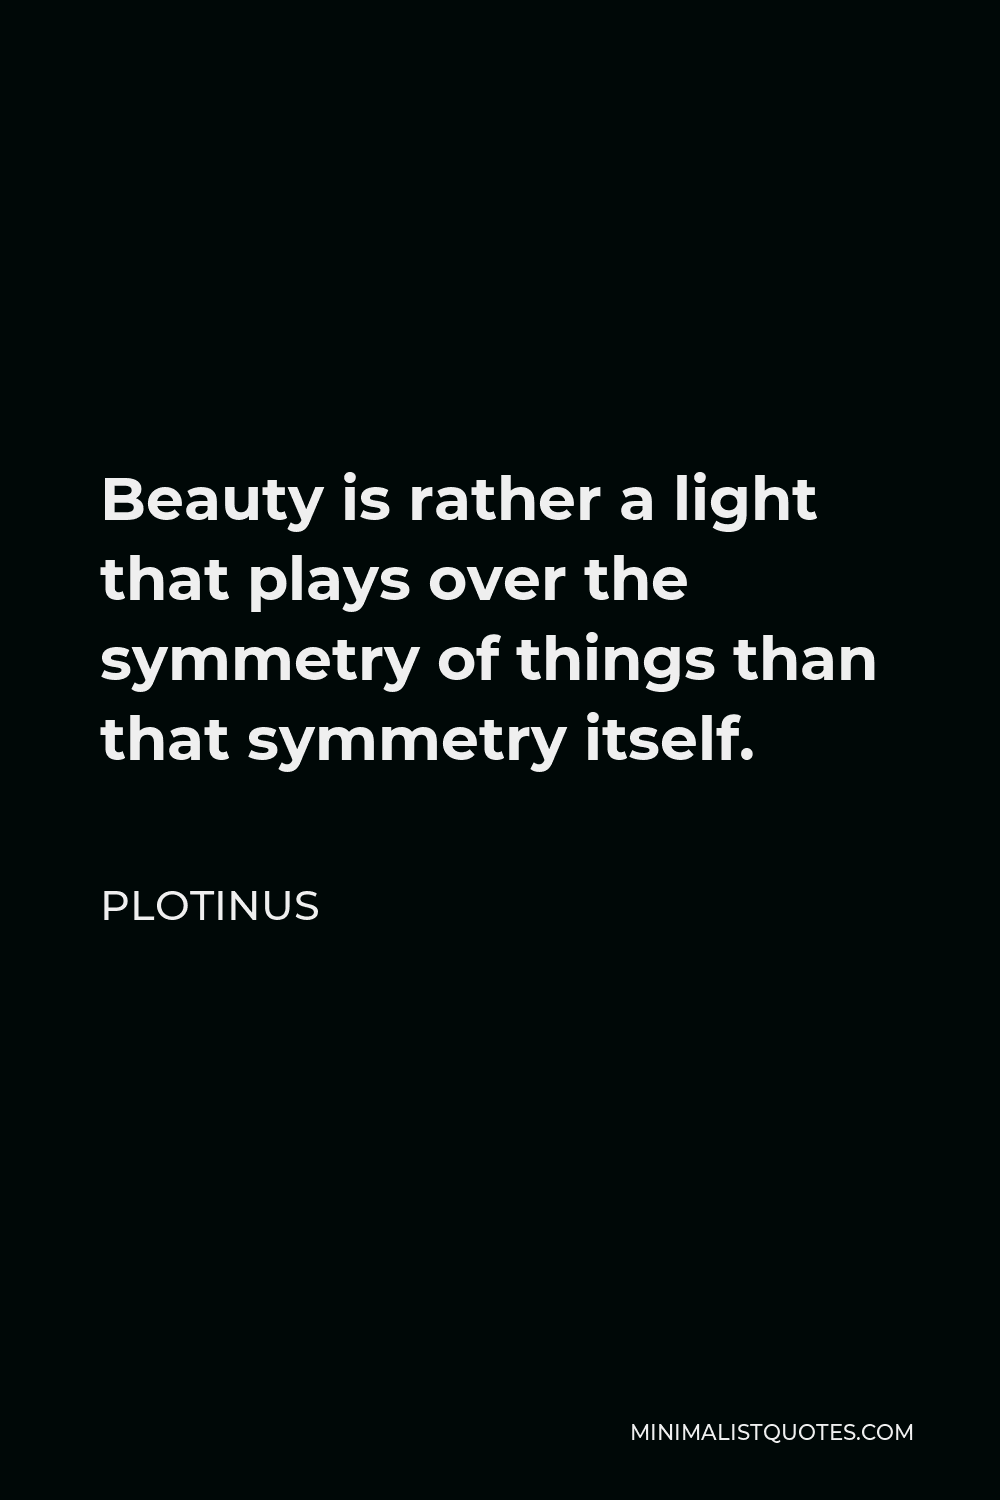 Plotinus Quote - Beauty is rather a light that plays over the symmetry of things than that symmetry itself.